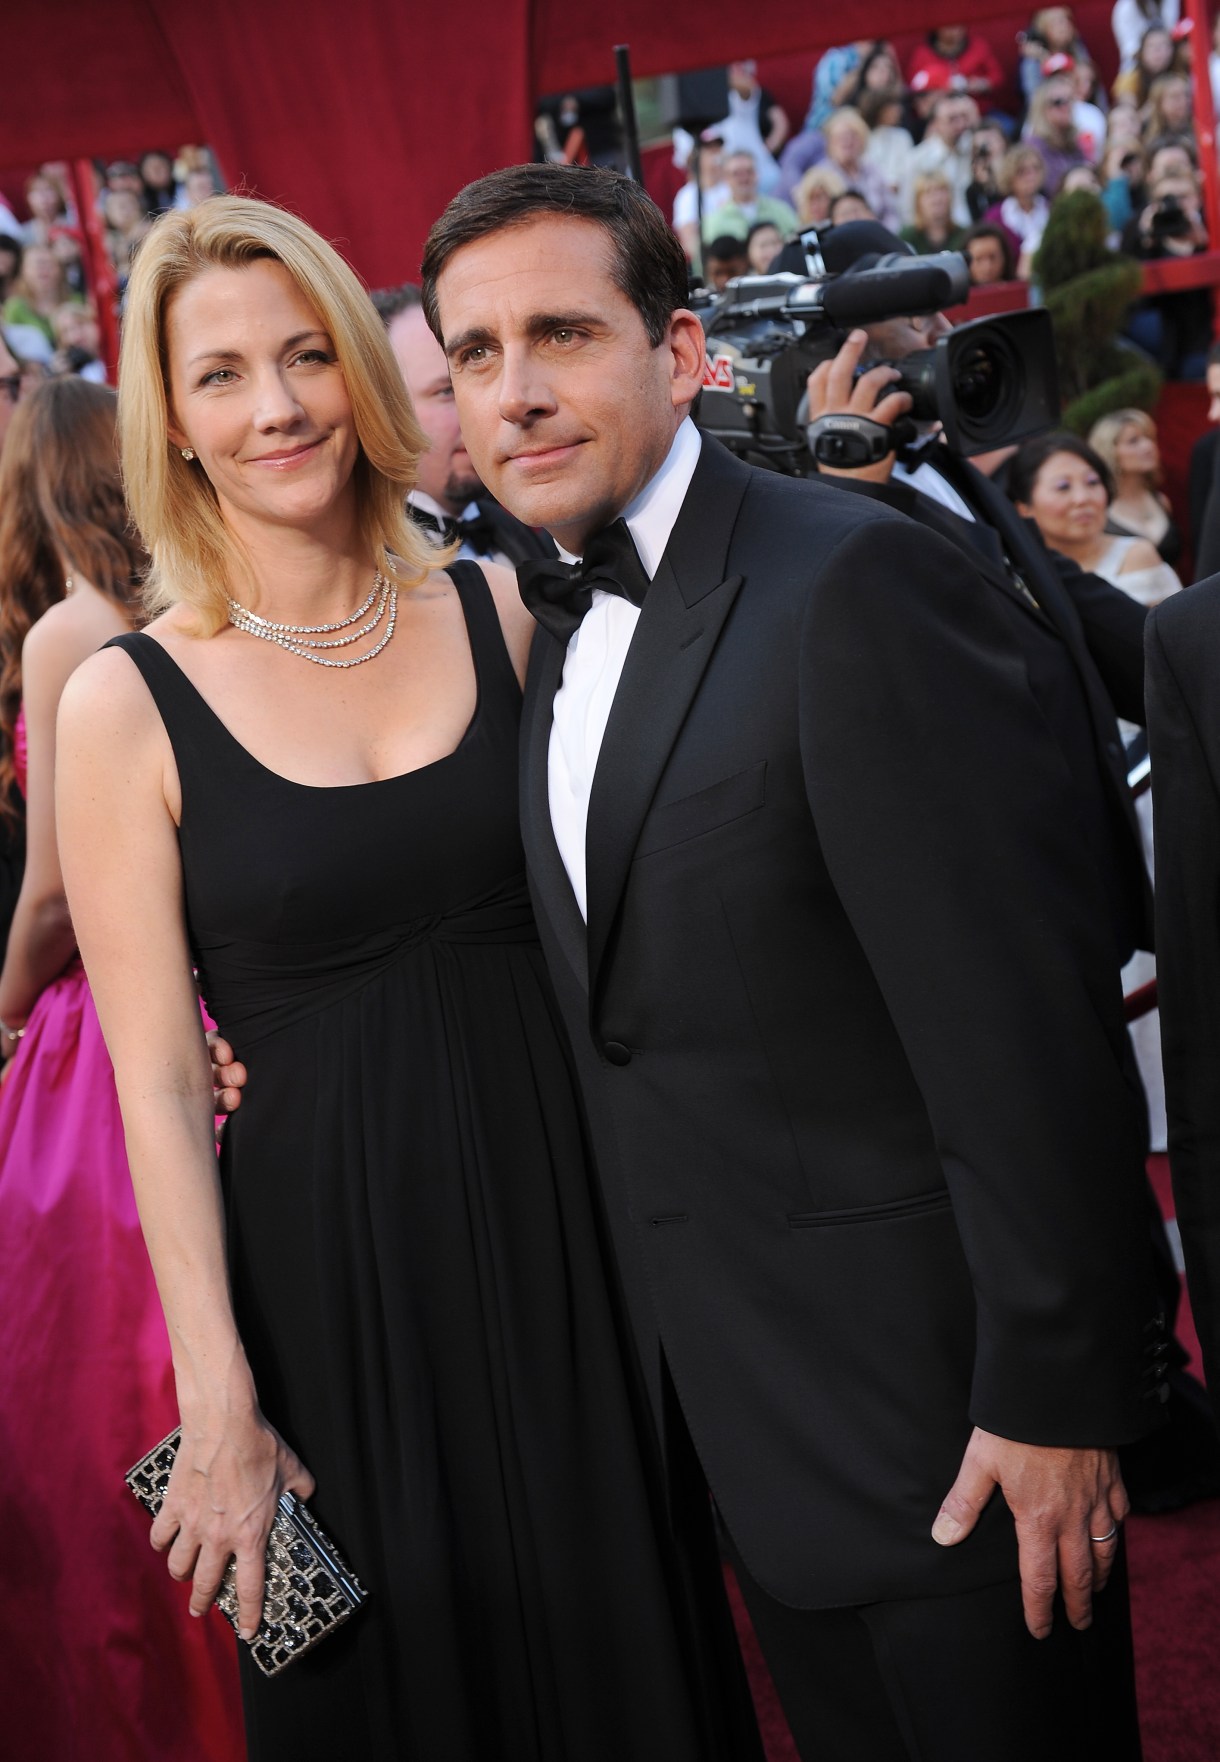 Actor Steve Carrell and Nancy Carrell arrive at the 82nd Academy Awards at the Kodak Theater in Hollywood, California on March 07, 2010. AFP PHOTO Robyn BECK